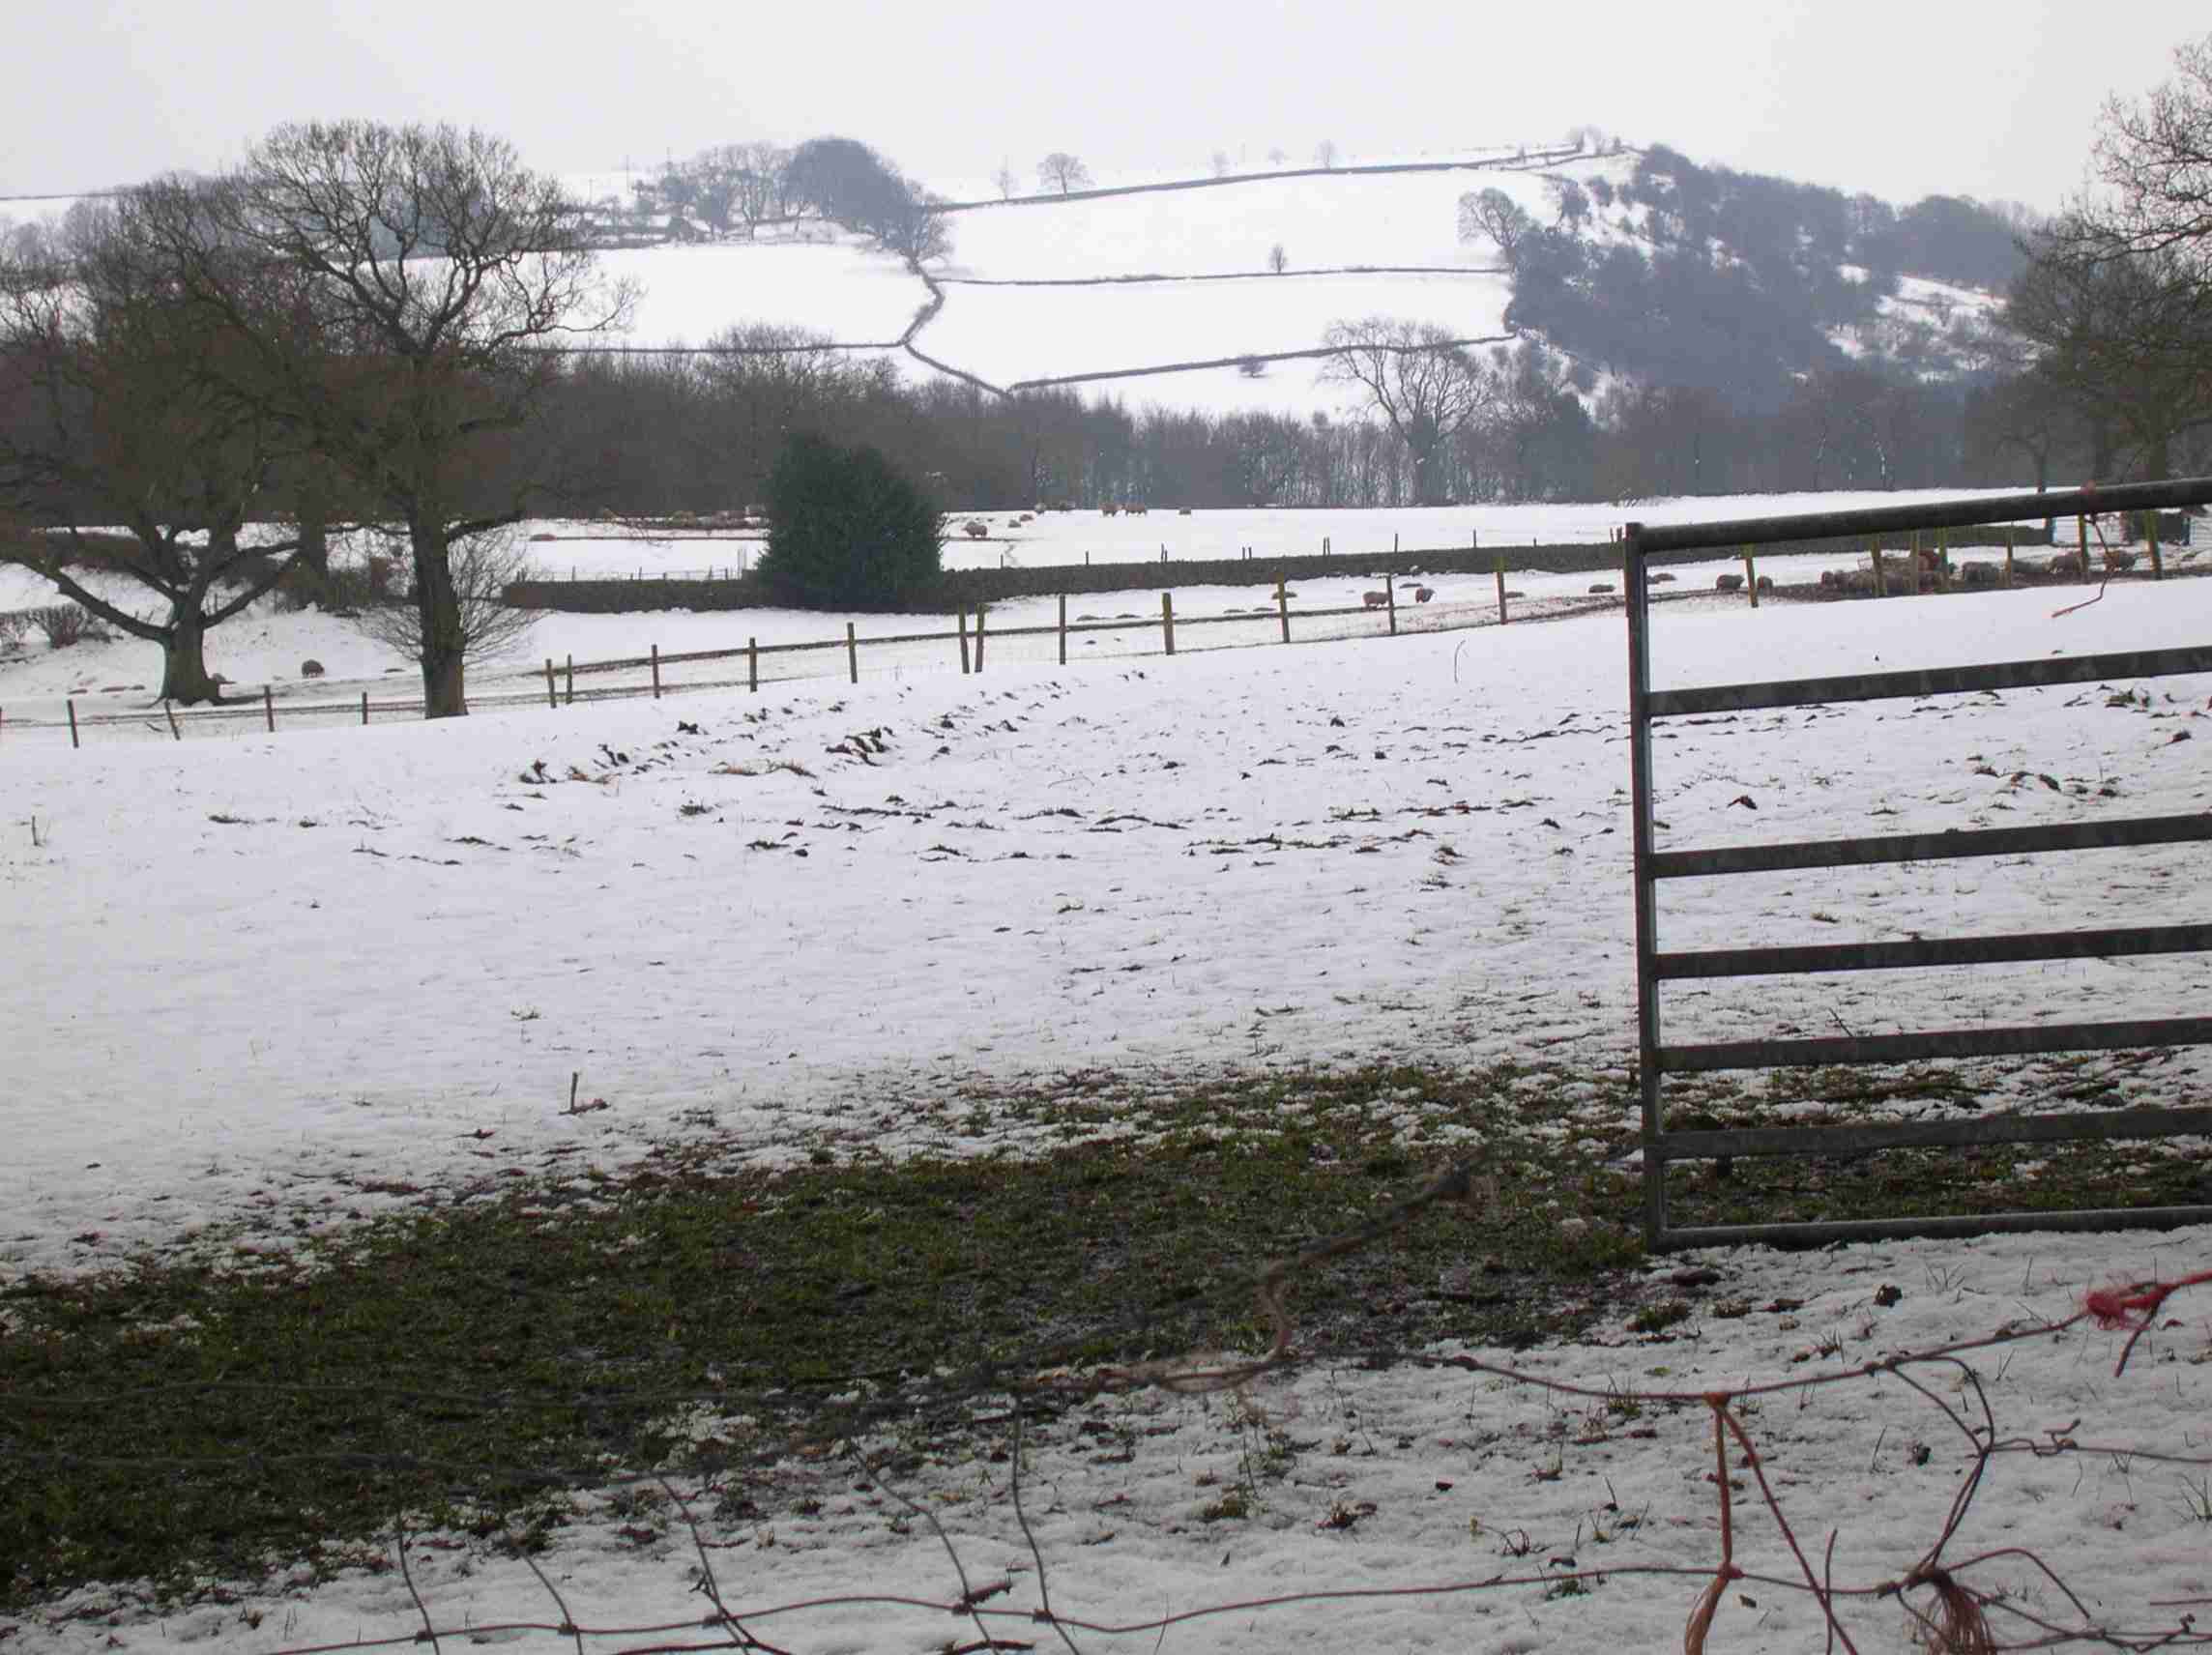 Looking from bottom of TOTLEY HALL LANE across TOTLEY HALL FARM fields